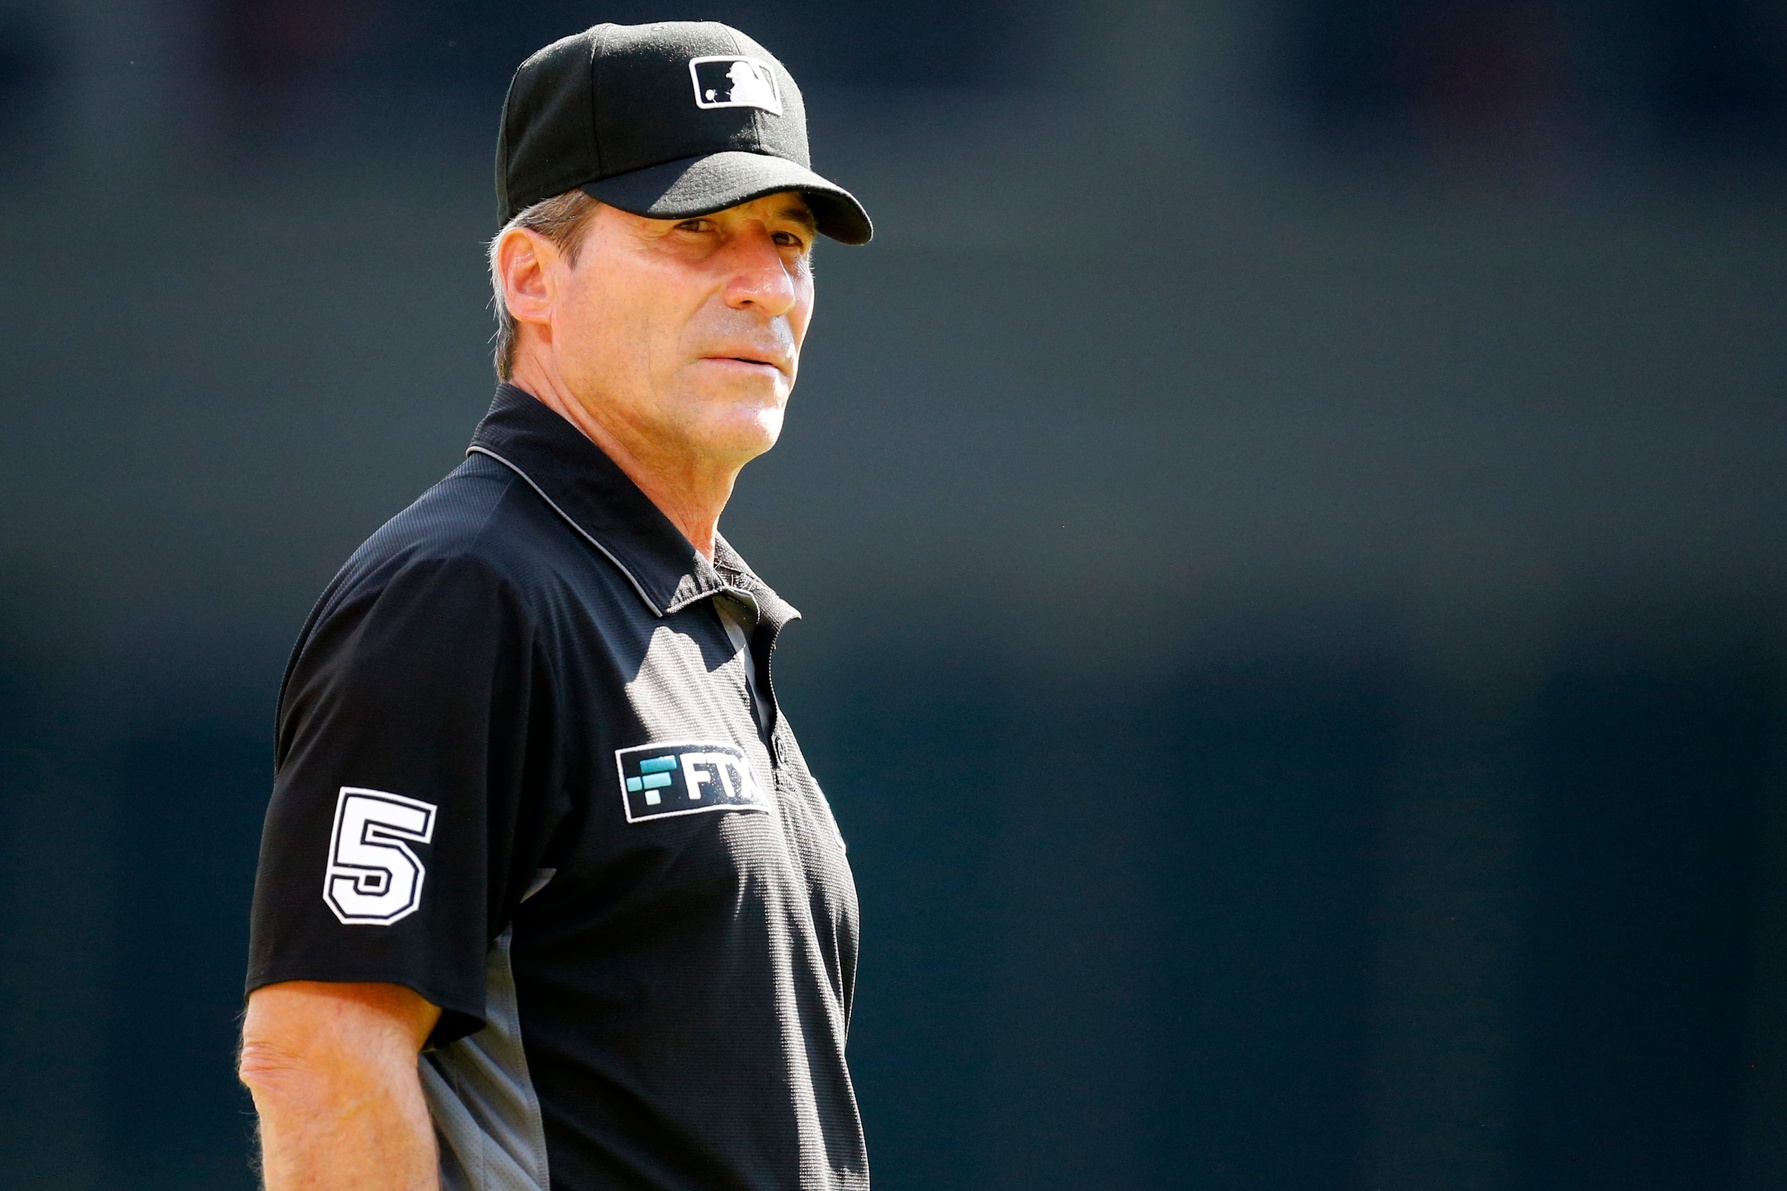 Angel Hernandez Retires: A Controversial Career Comes to an End – What’s Next for MLB?